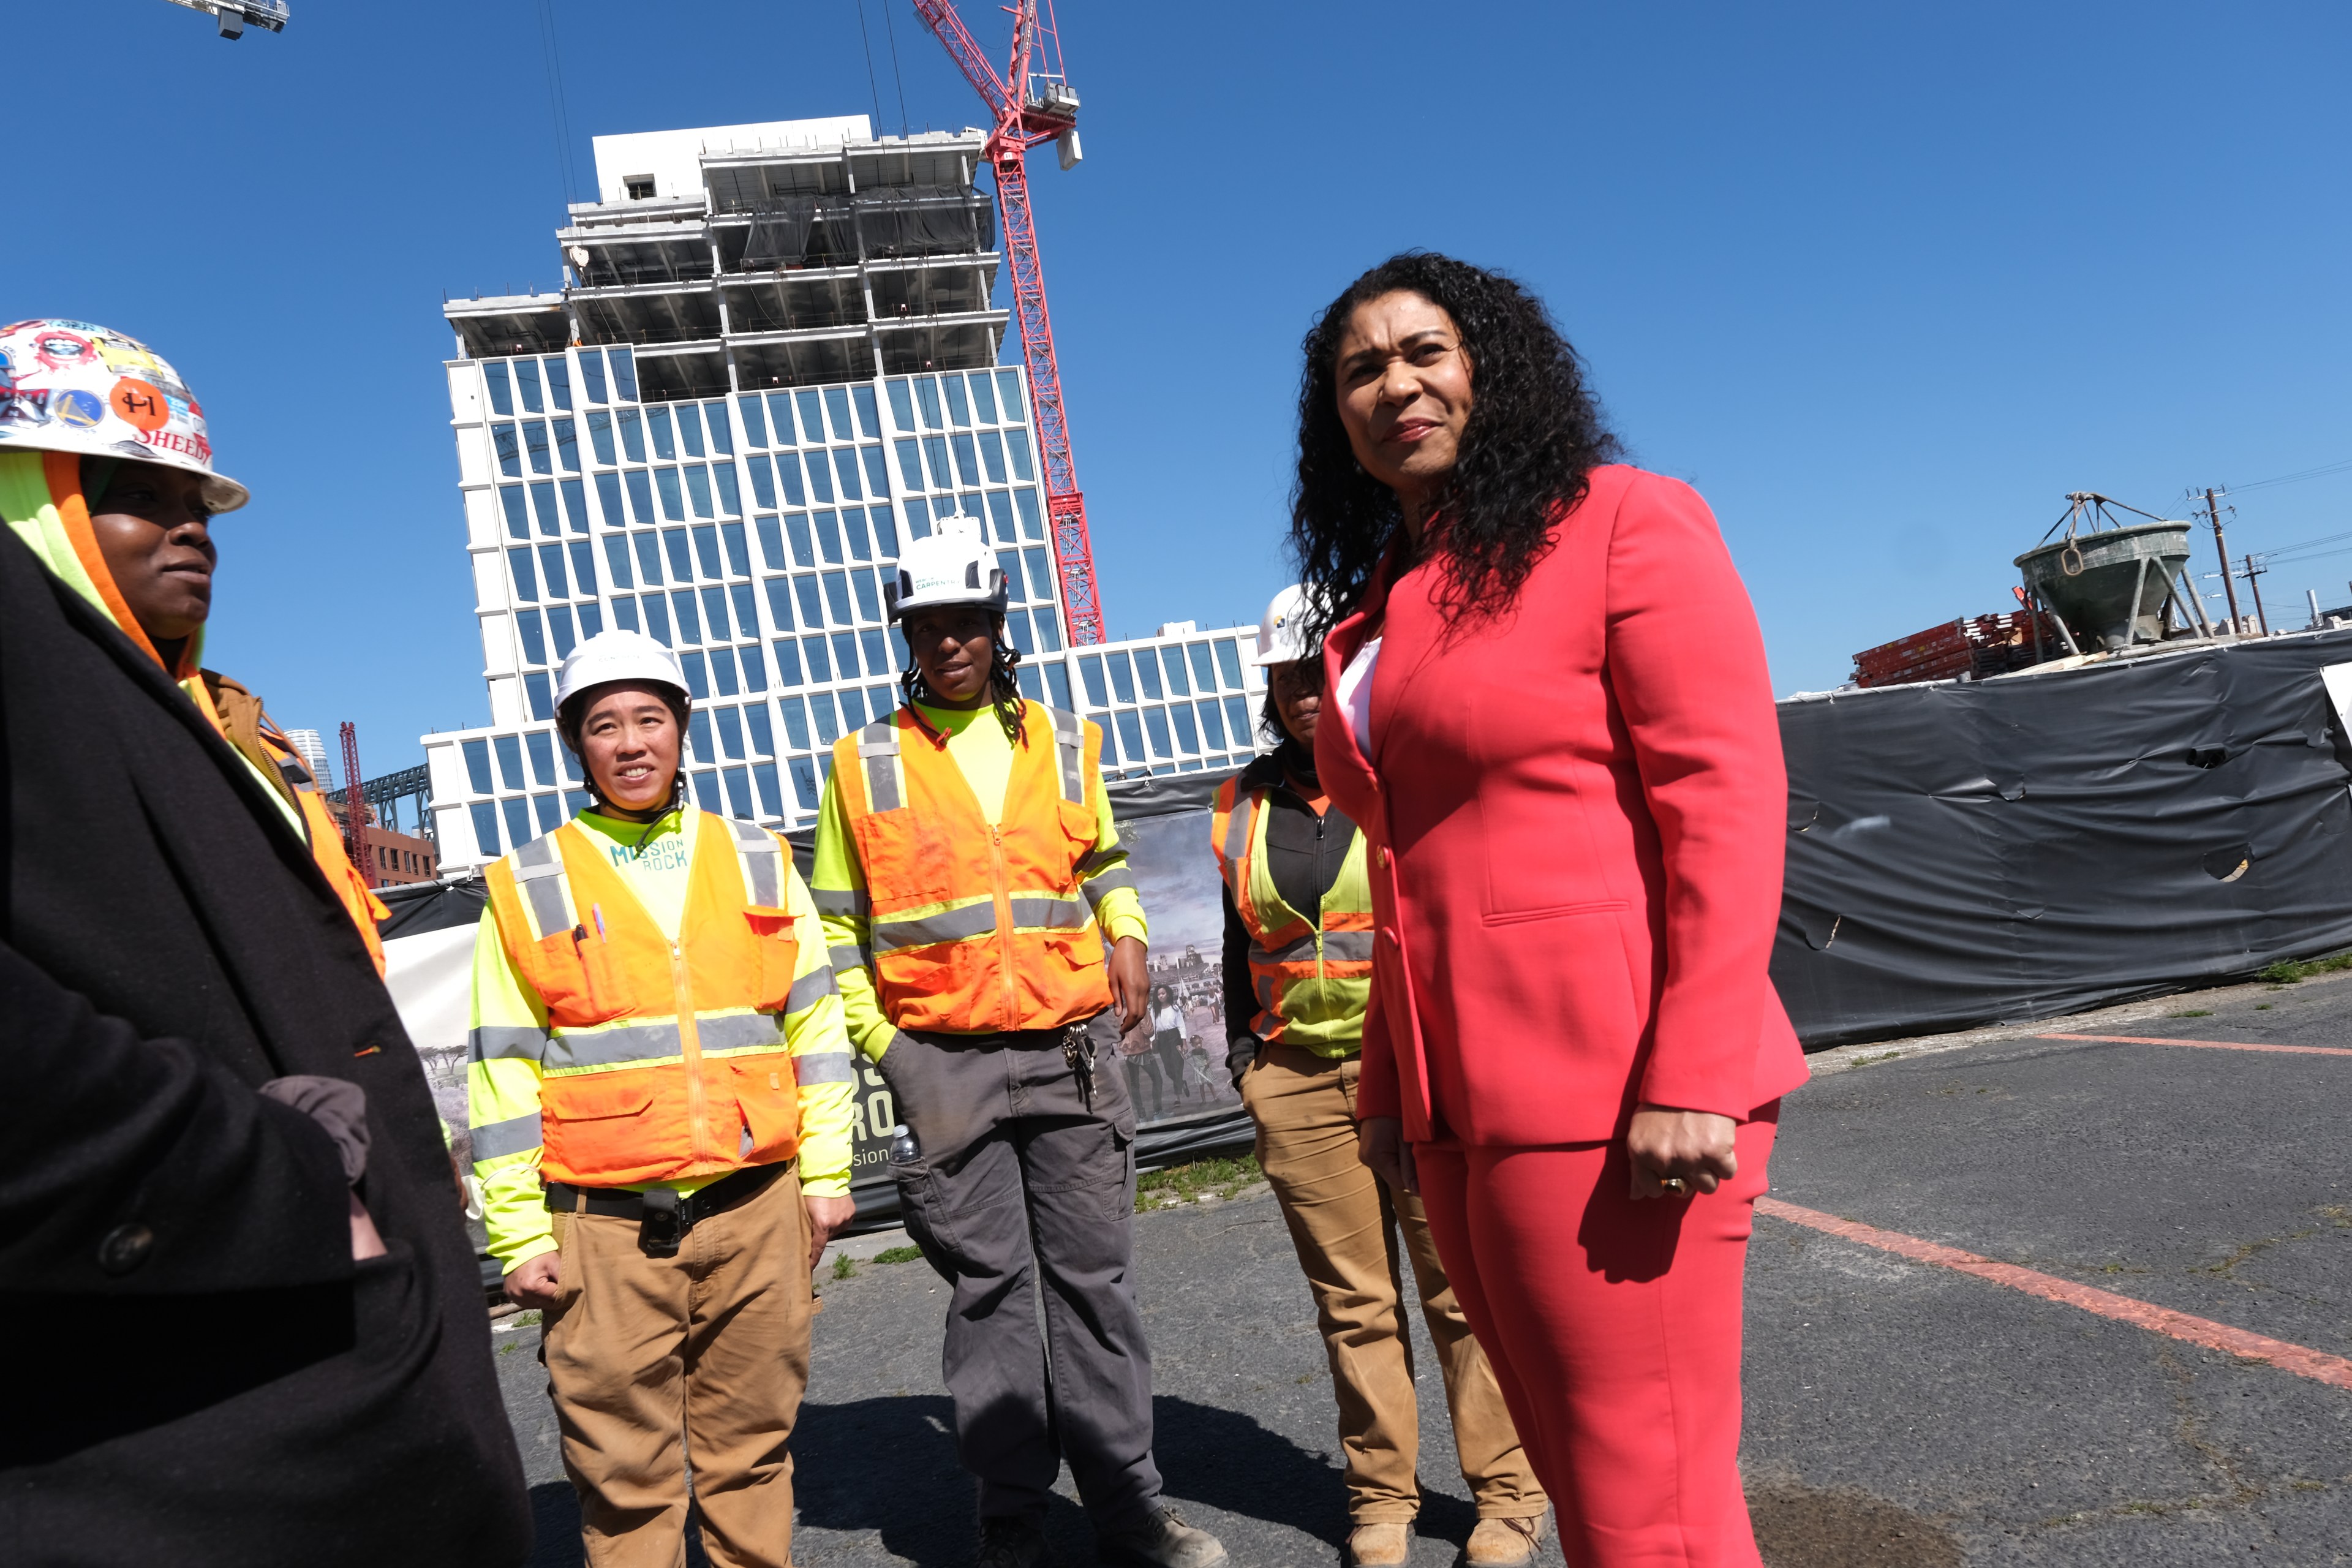 A woman in a red suit stands in the foreground with construction workers in high-visibility vests and a building site behind them.